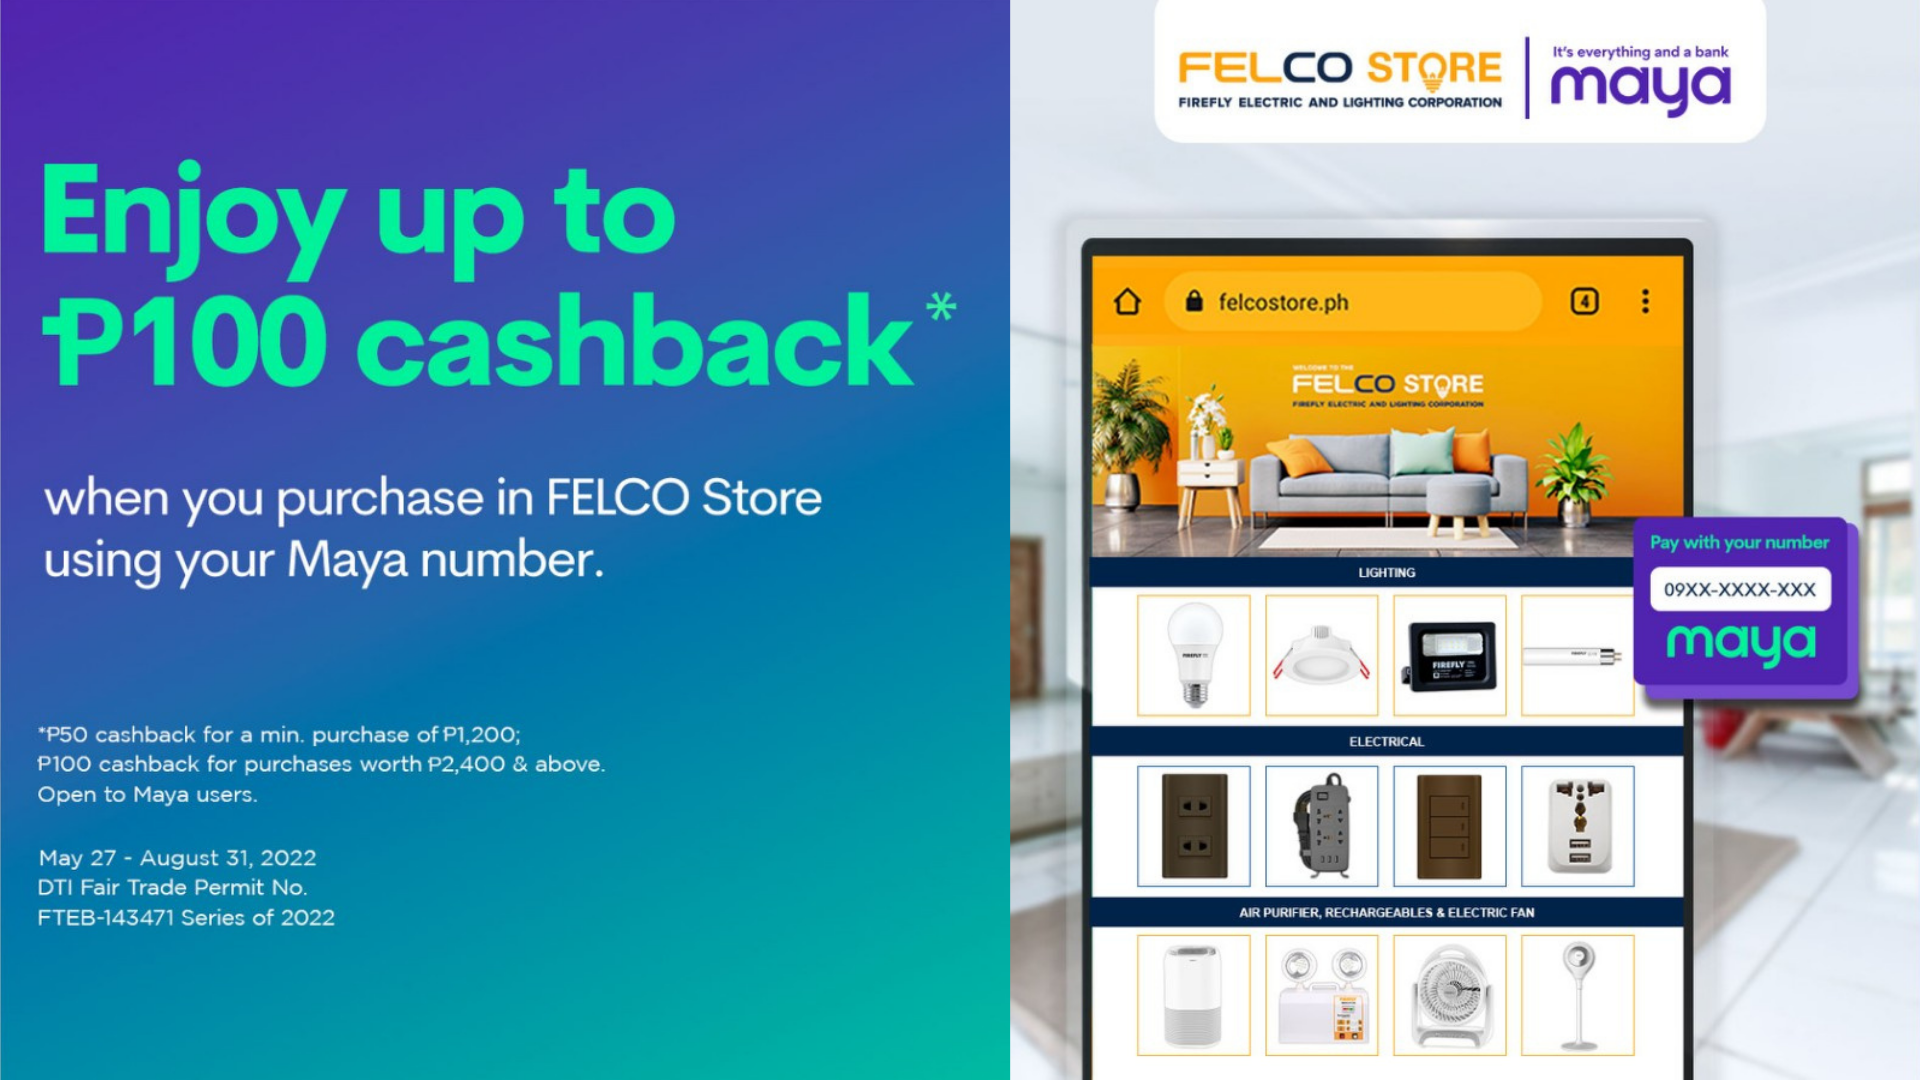 Enjoy up to P100 cashback when you shop at felcostore.ph!